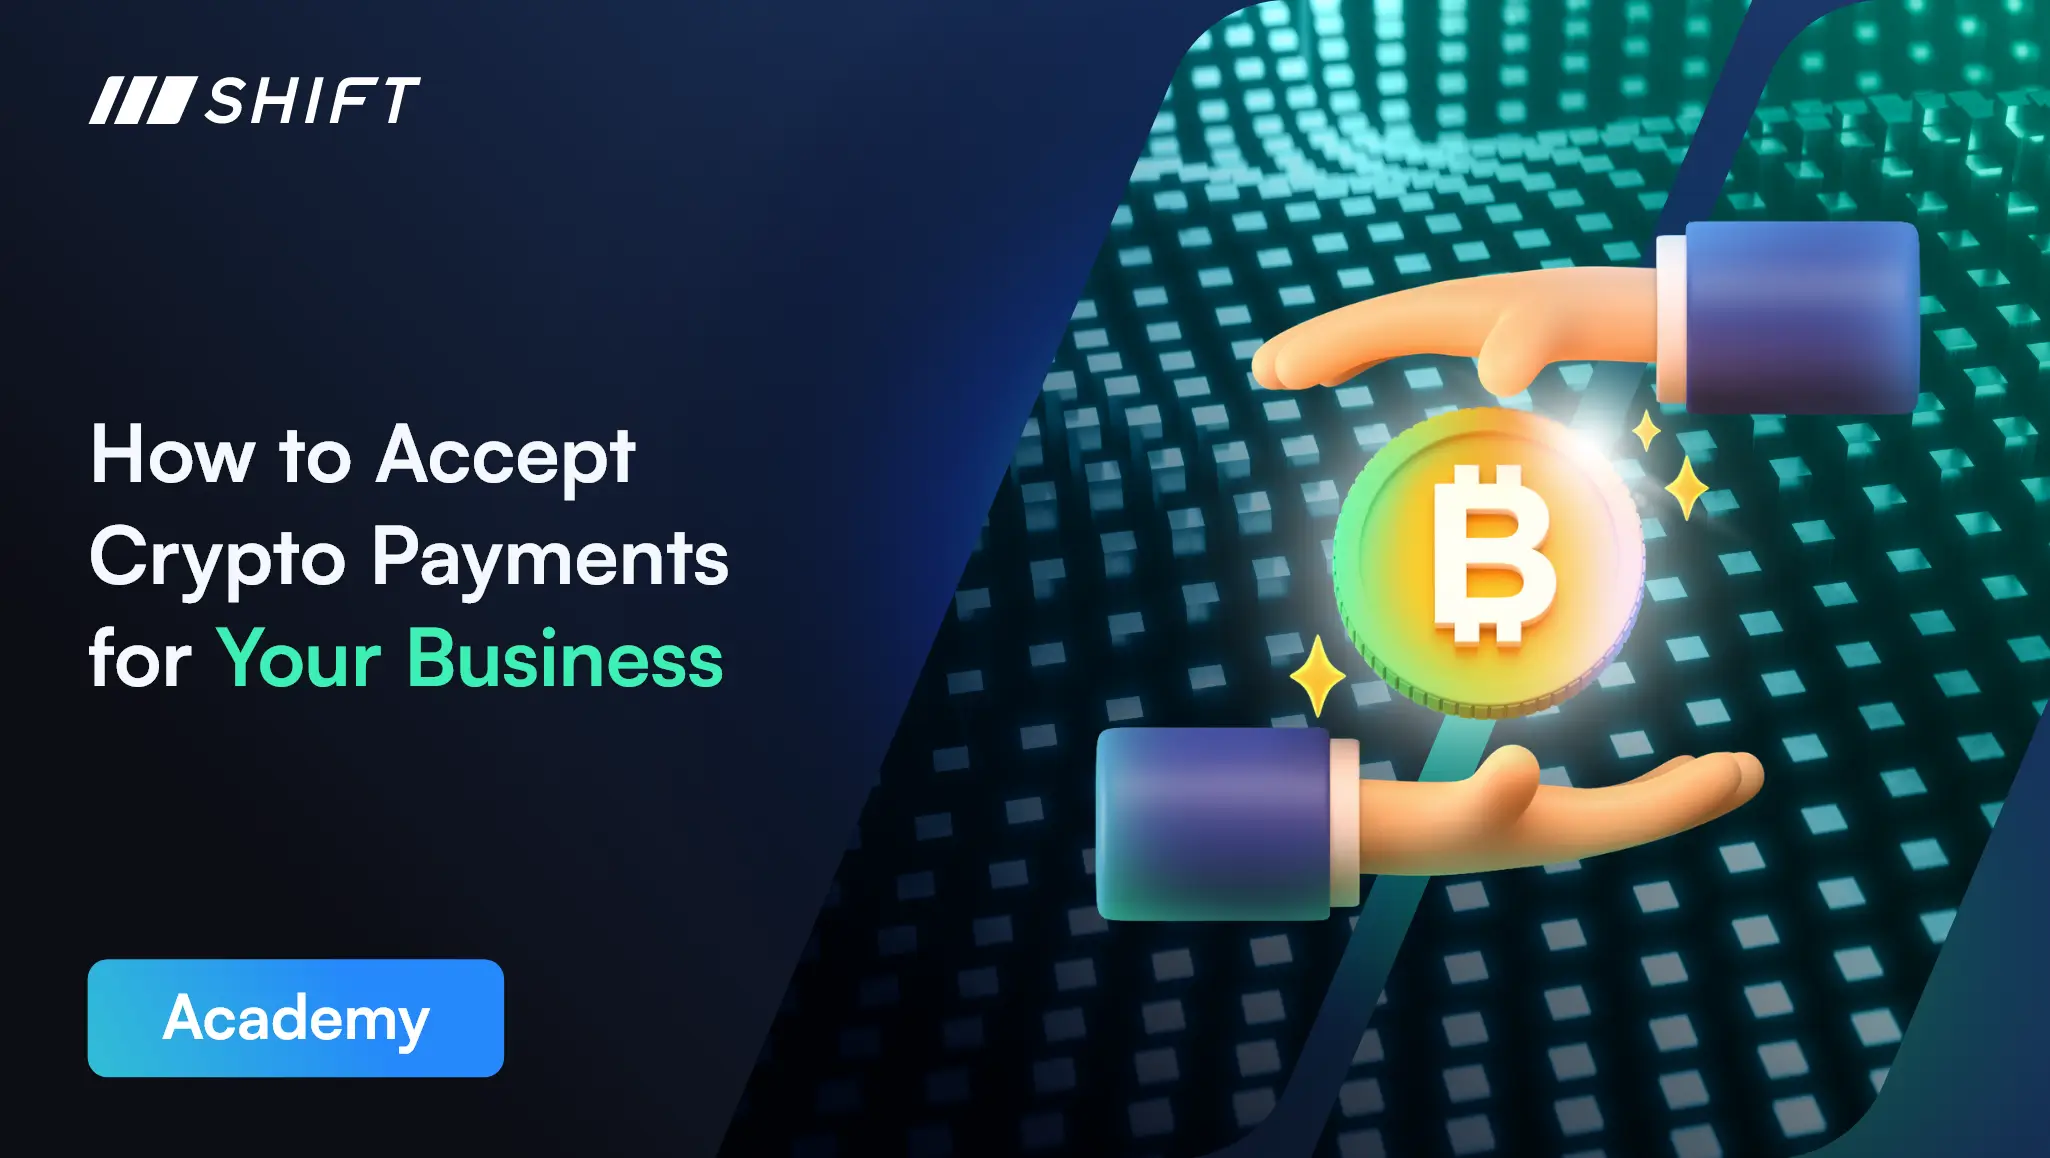 Learn how to accept crypto payments for your business with Shift Markets